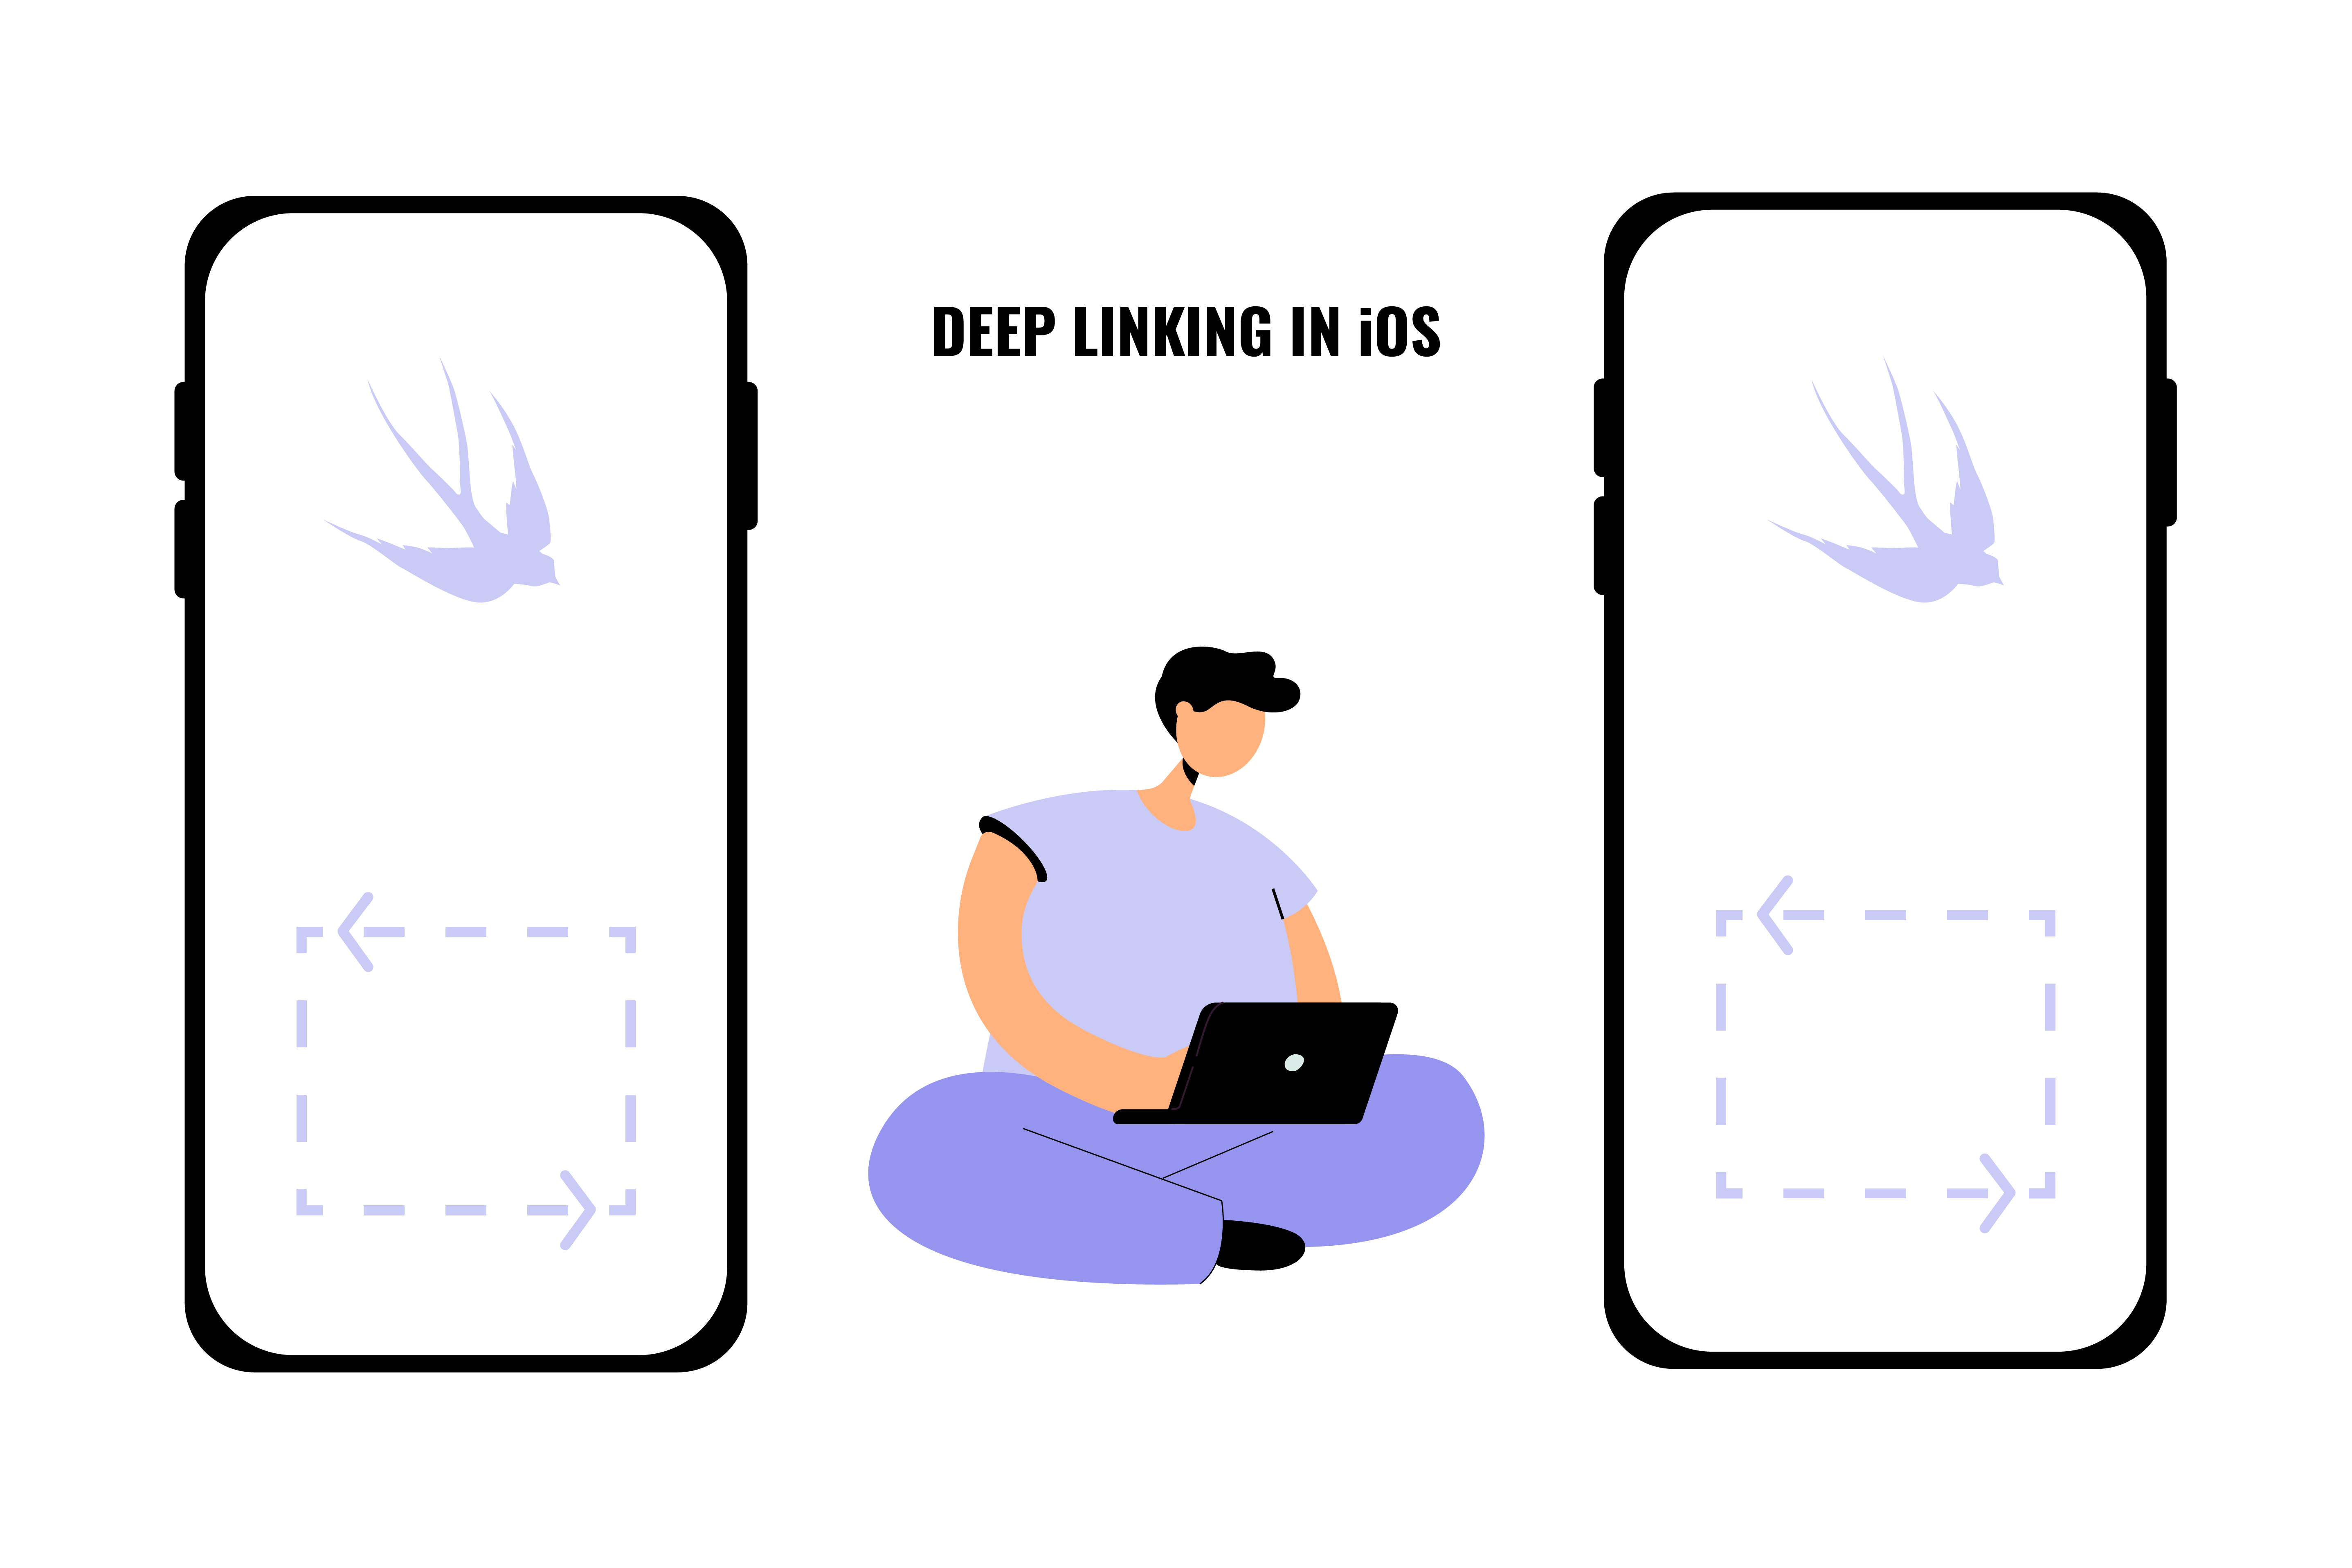 iOS Deep Linking: What Is It All About?